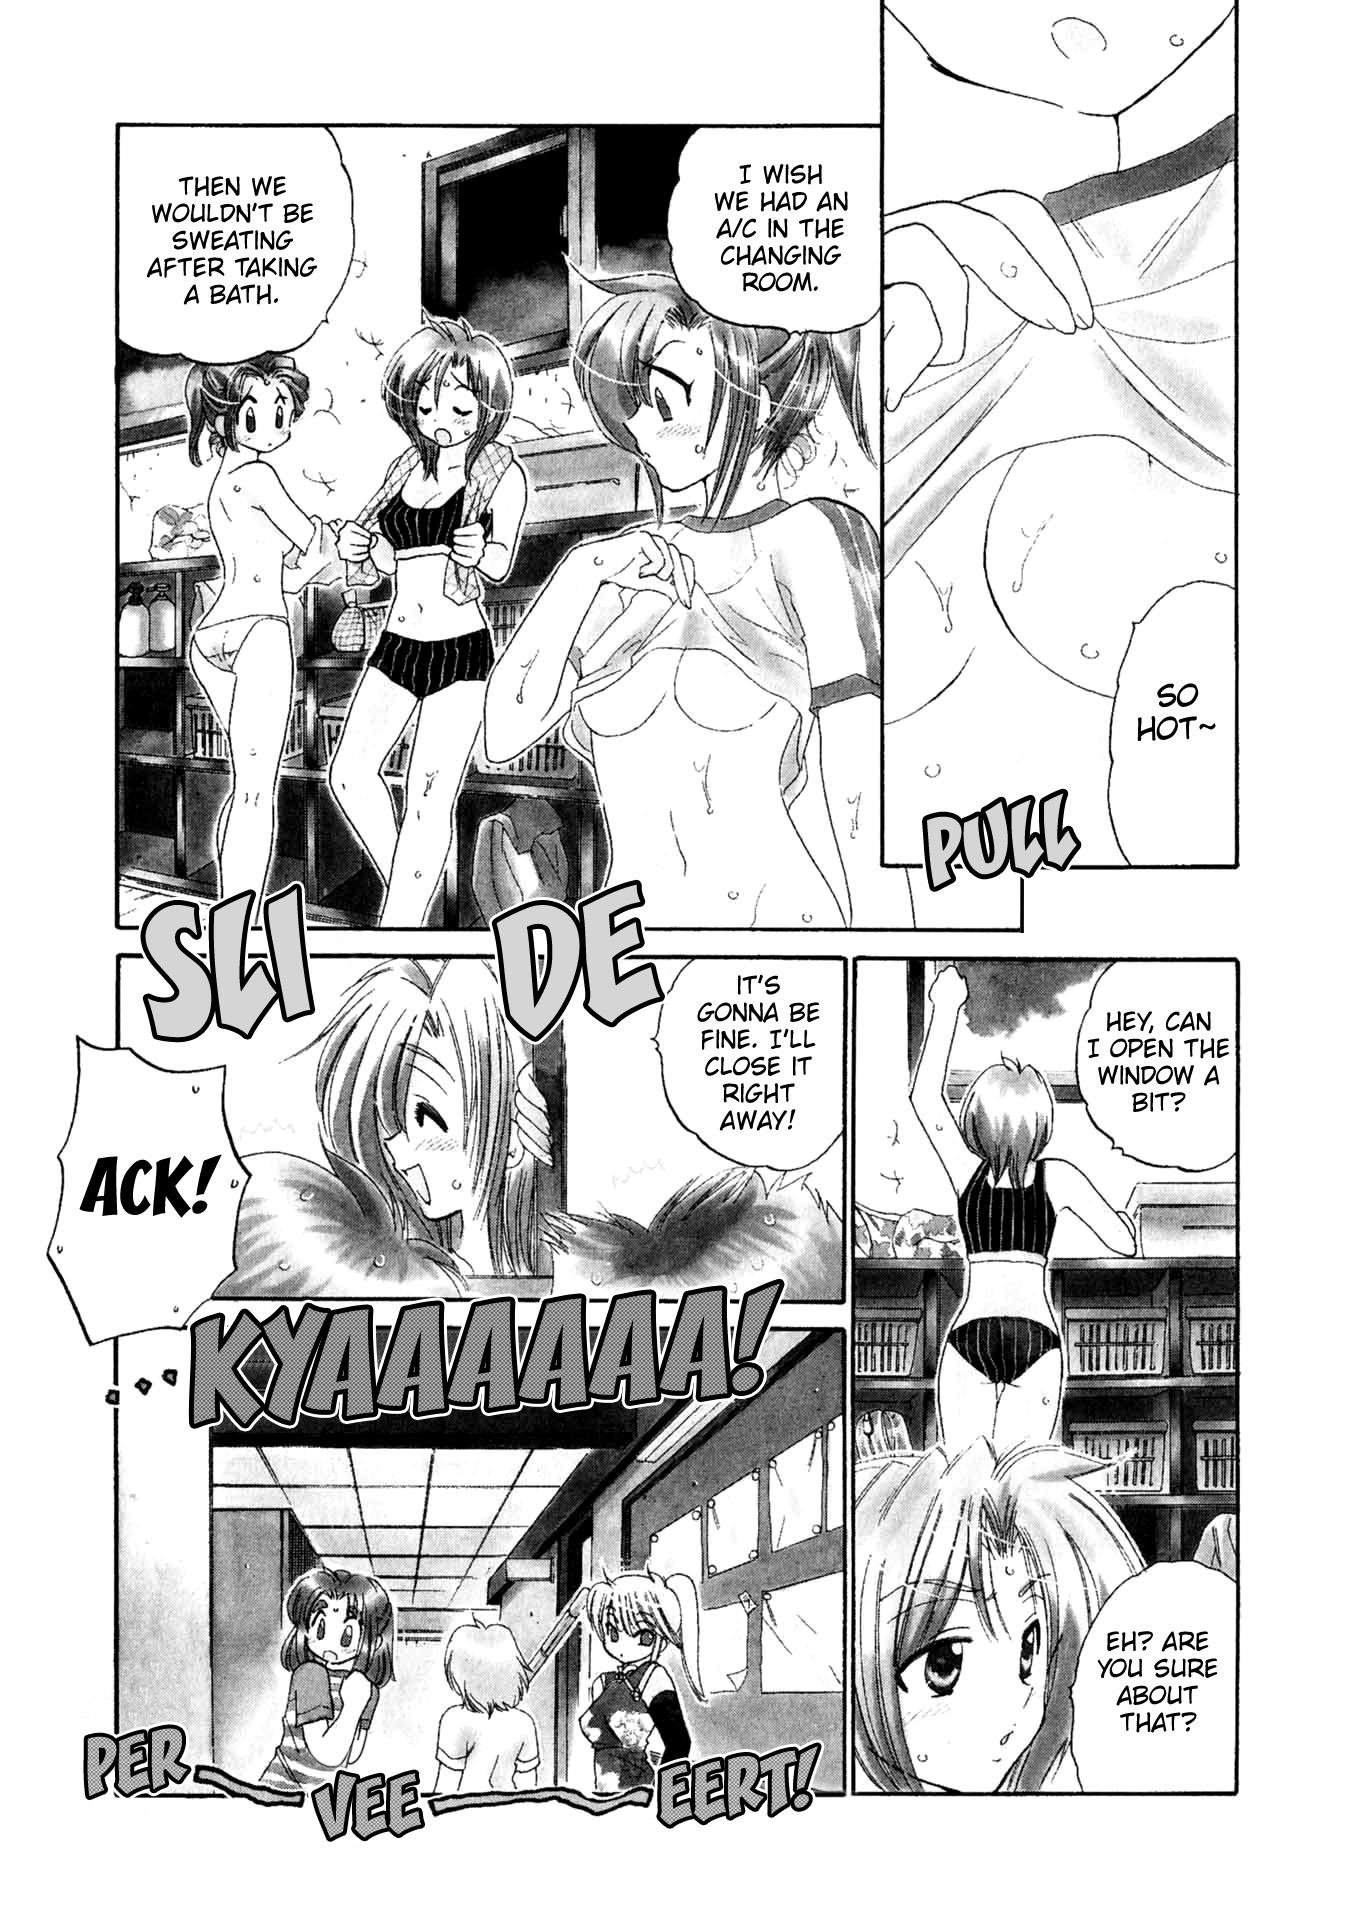 Osawagase Bentenryou Vol.1 Chapter 4: The Girls' Dorm In Danger!! - Picture 2